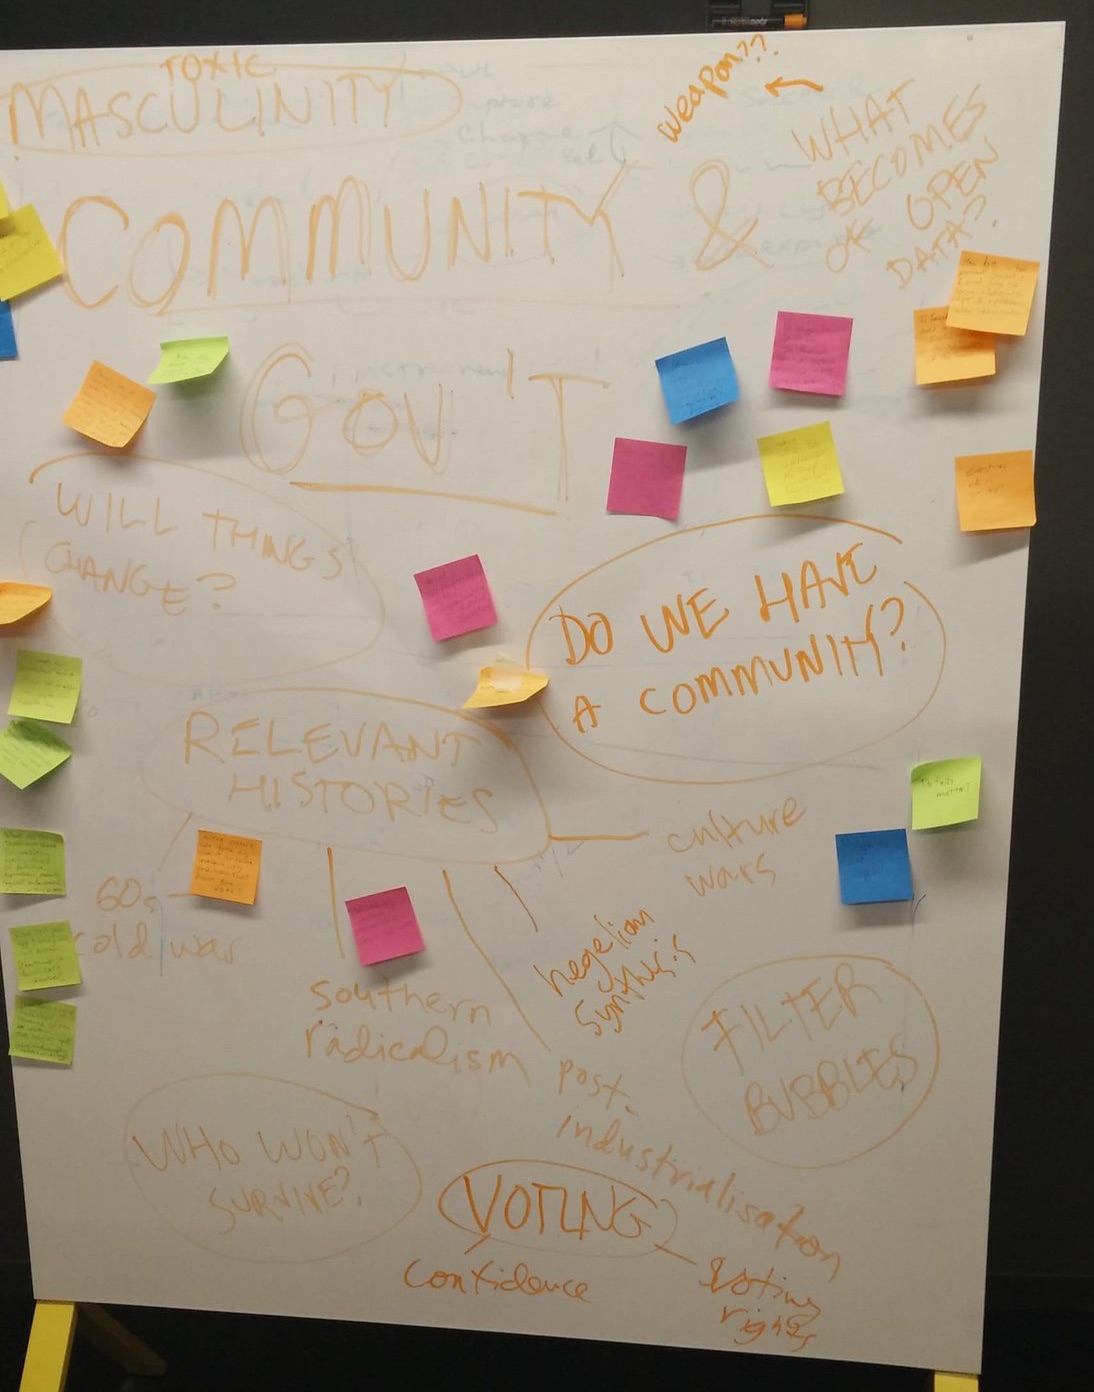 Question 1: How are you feeling about community and government right now?